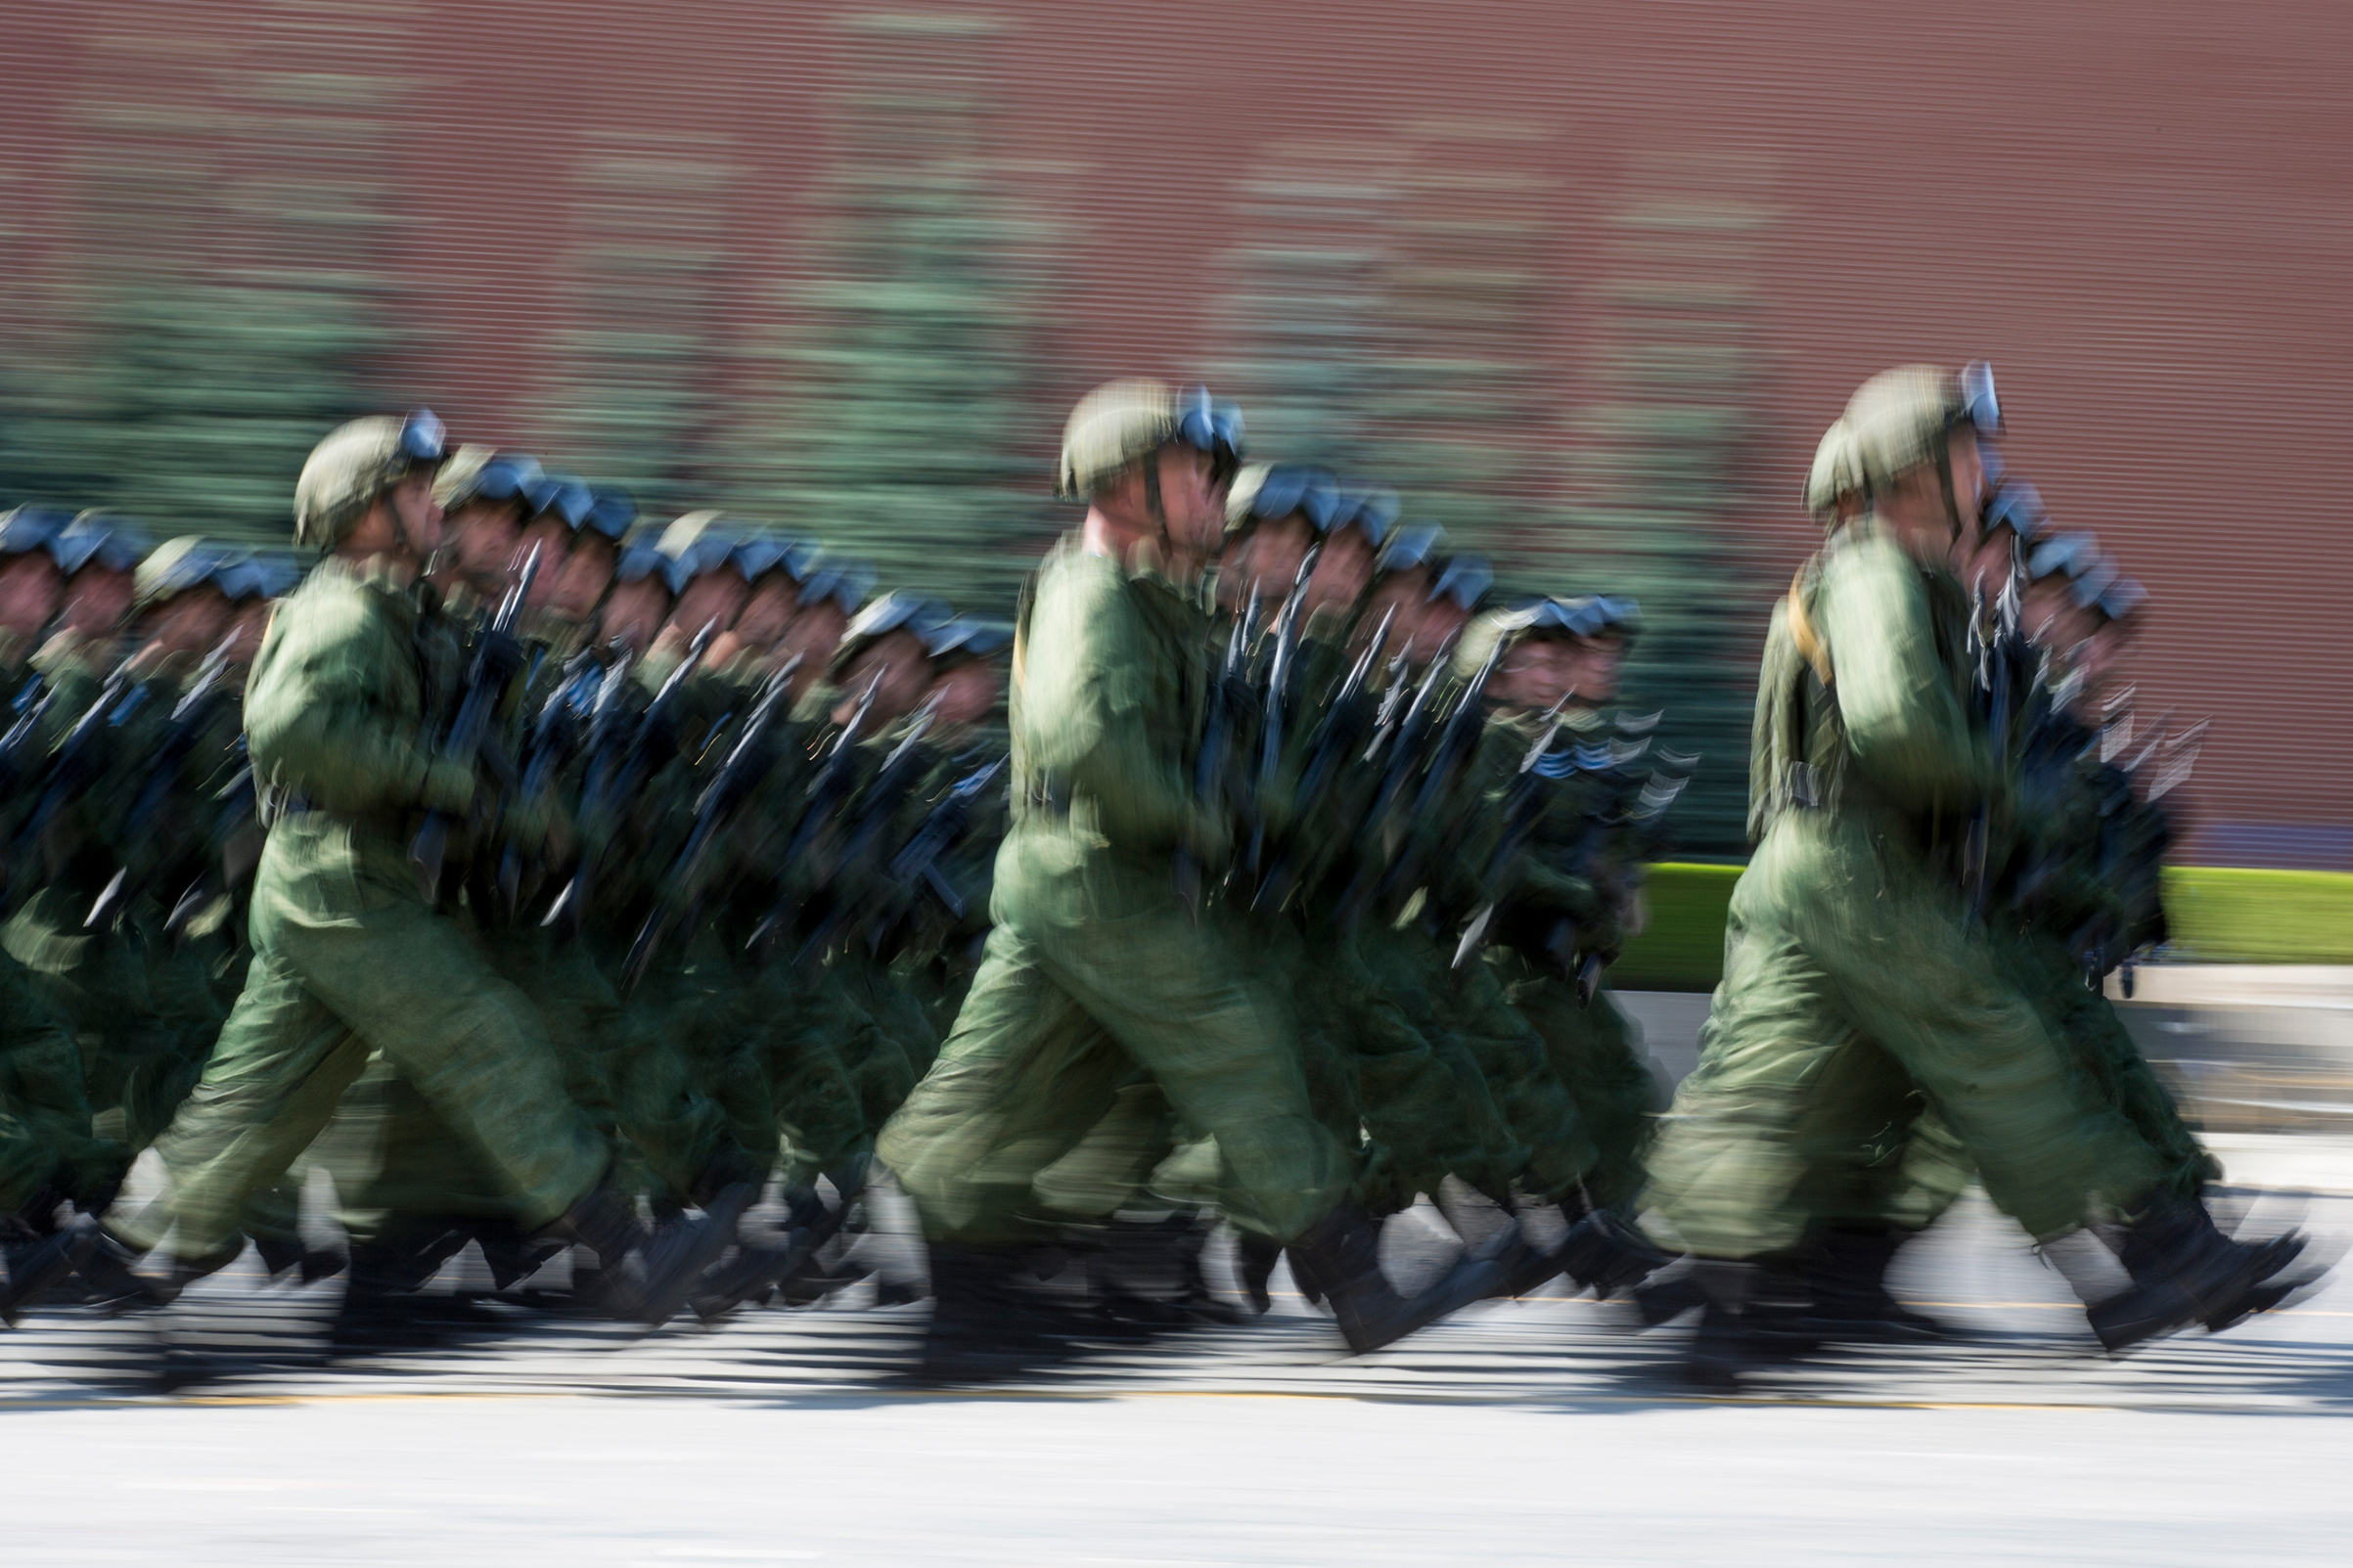 Russian paratroopers march during  the celebrations of Paratroopers Day in the Red Square in Moscow, Russia. (Alexander Zemlianichenko—AP)